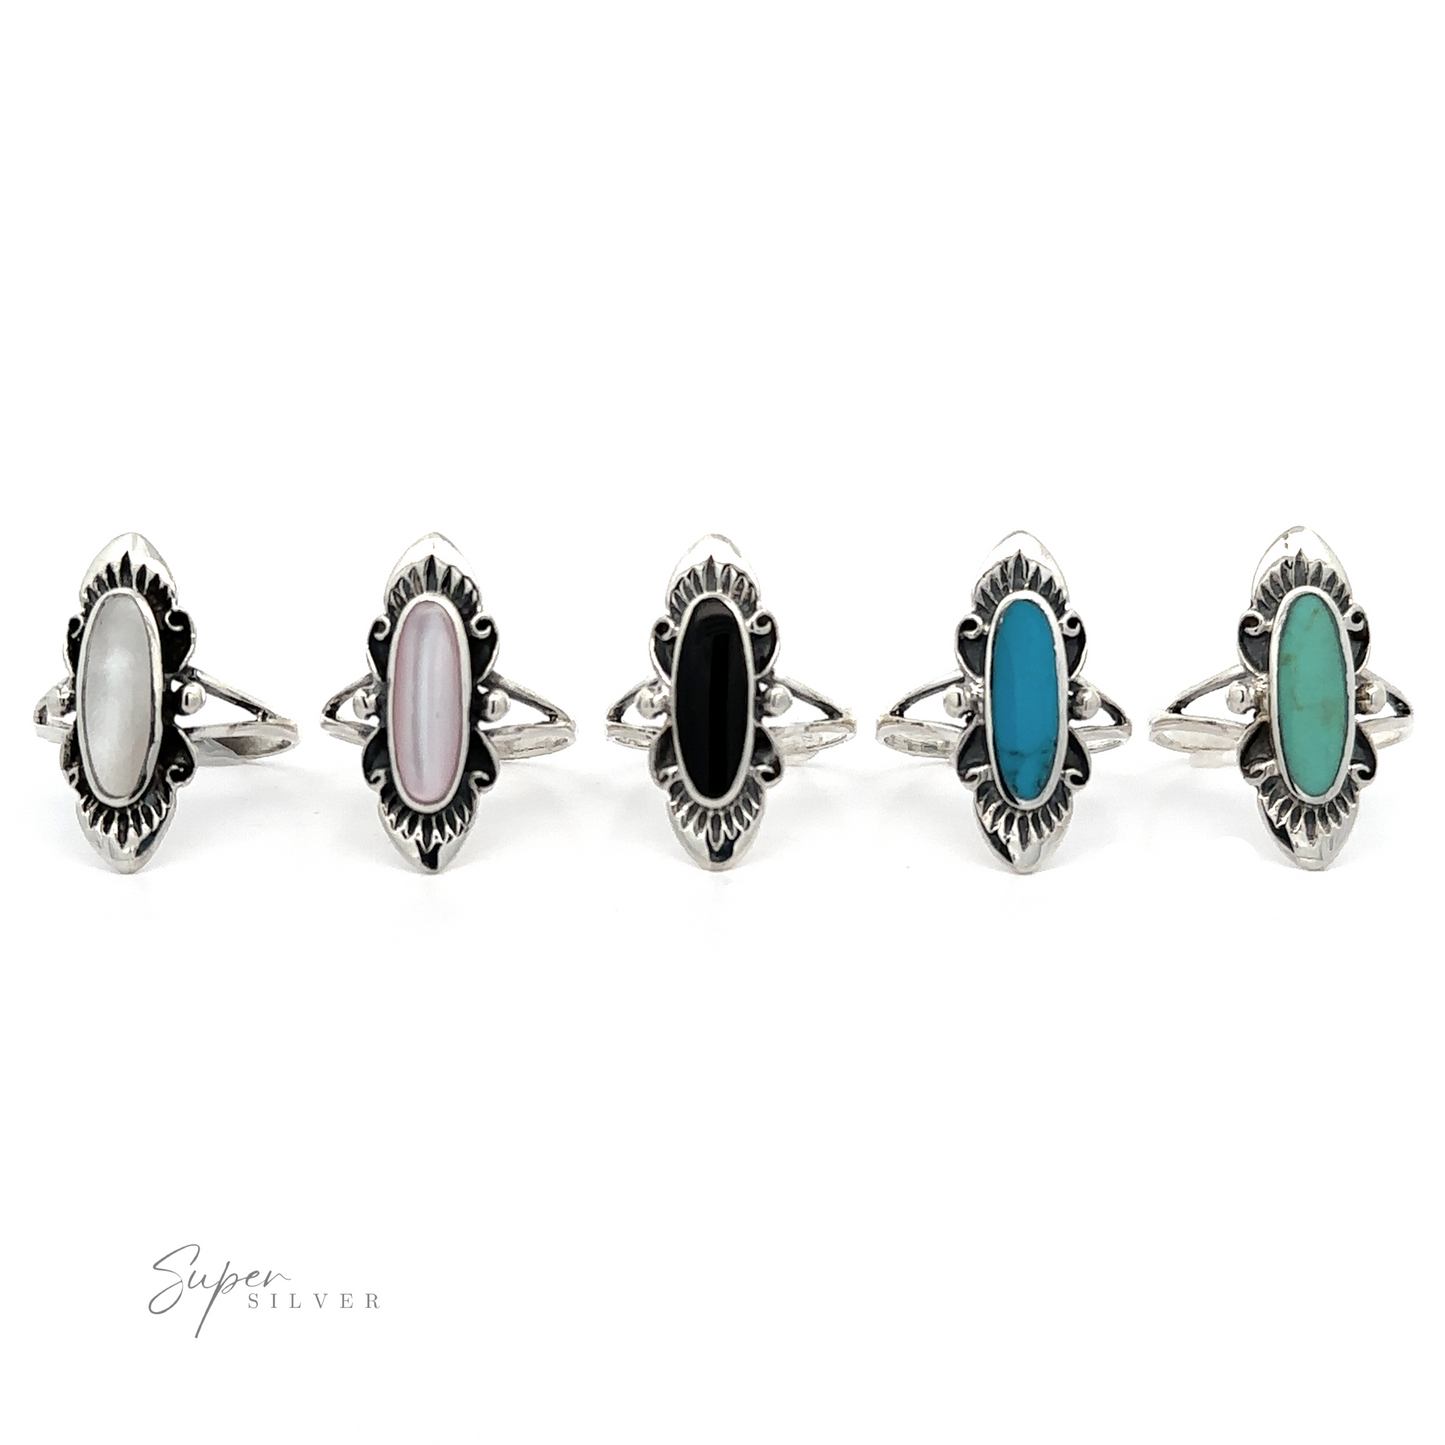 A stylish group of rings with different colored stones, including an antique look and Southwest Inspired Elongated Oval Ring.